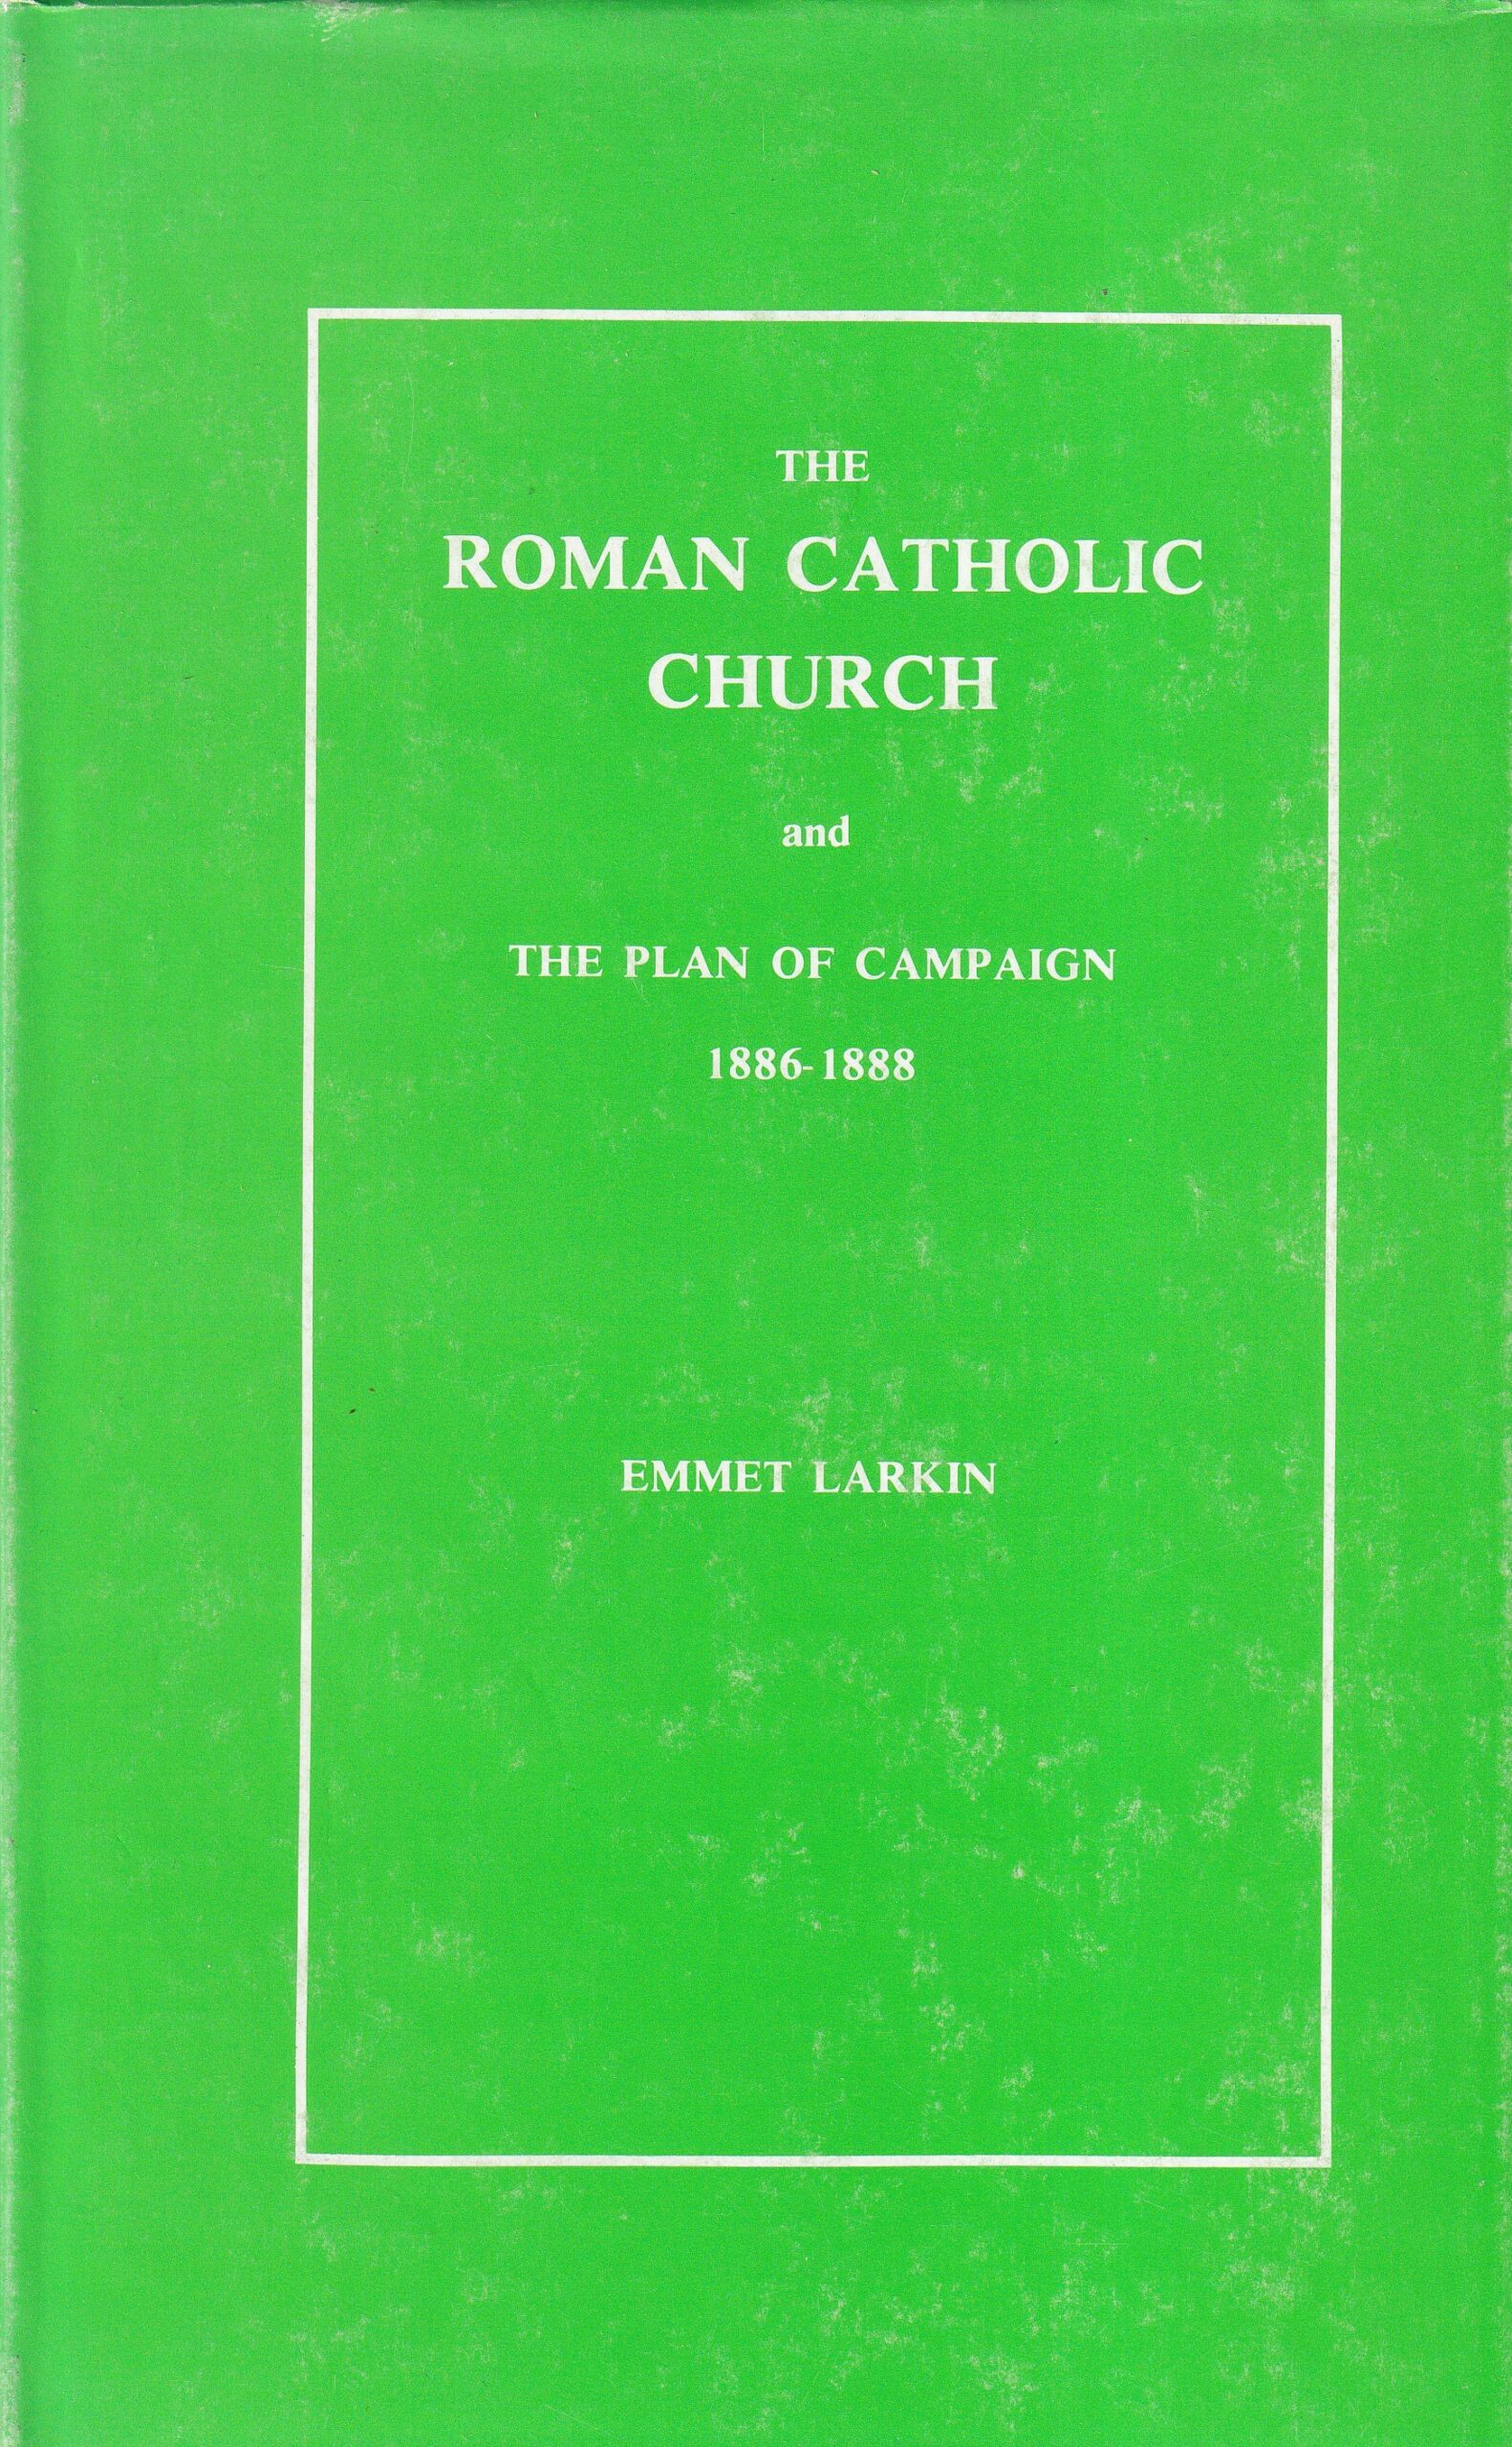 The Roman Catholic church and the plan of campaign in Ireland 1886-1888 by Emmet Larkin